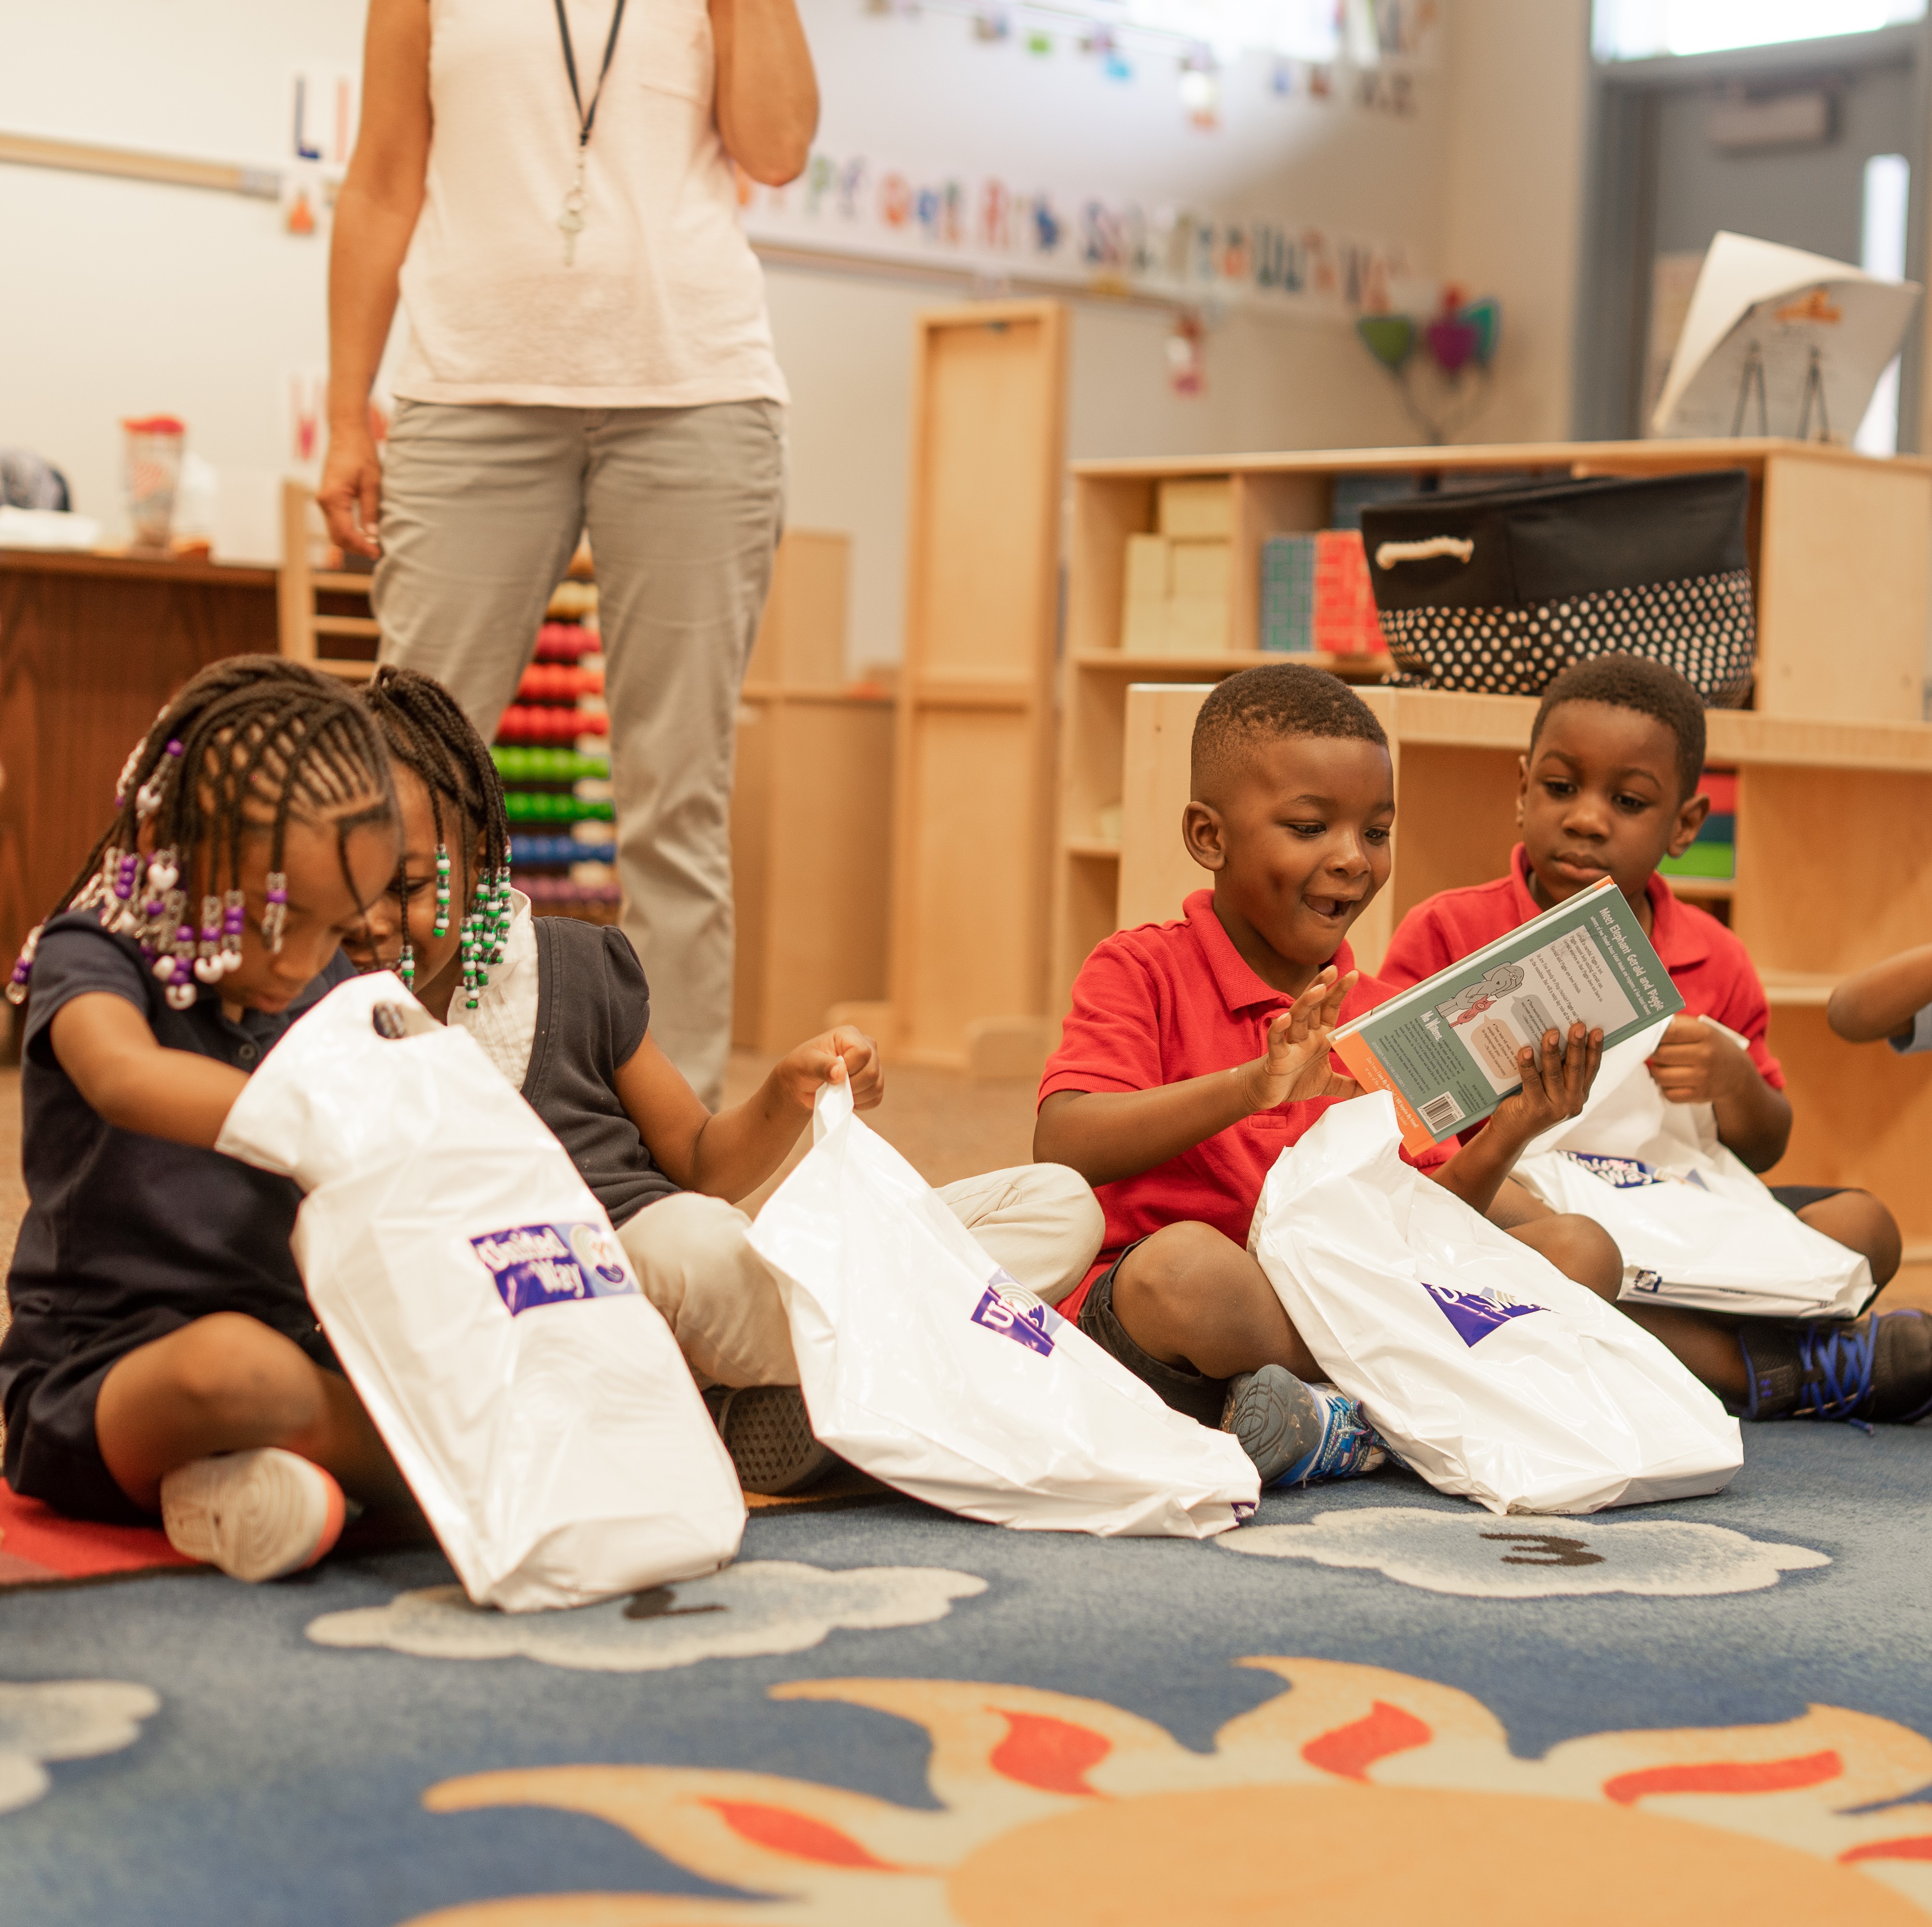 "Four children sit on a classroom rug and excitedly open their own small bag of children's books labeled with the Trident United Way logo."